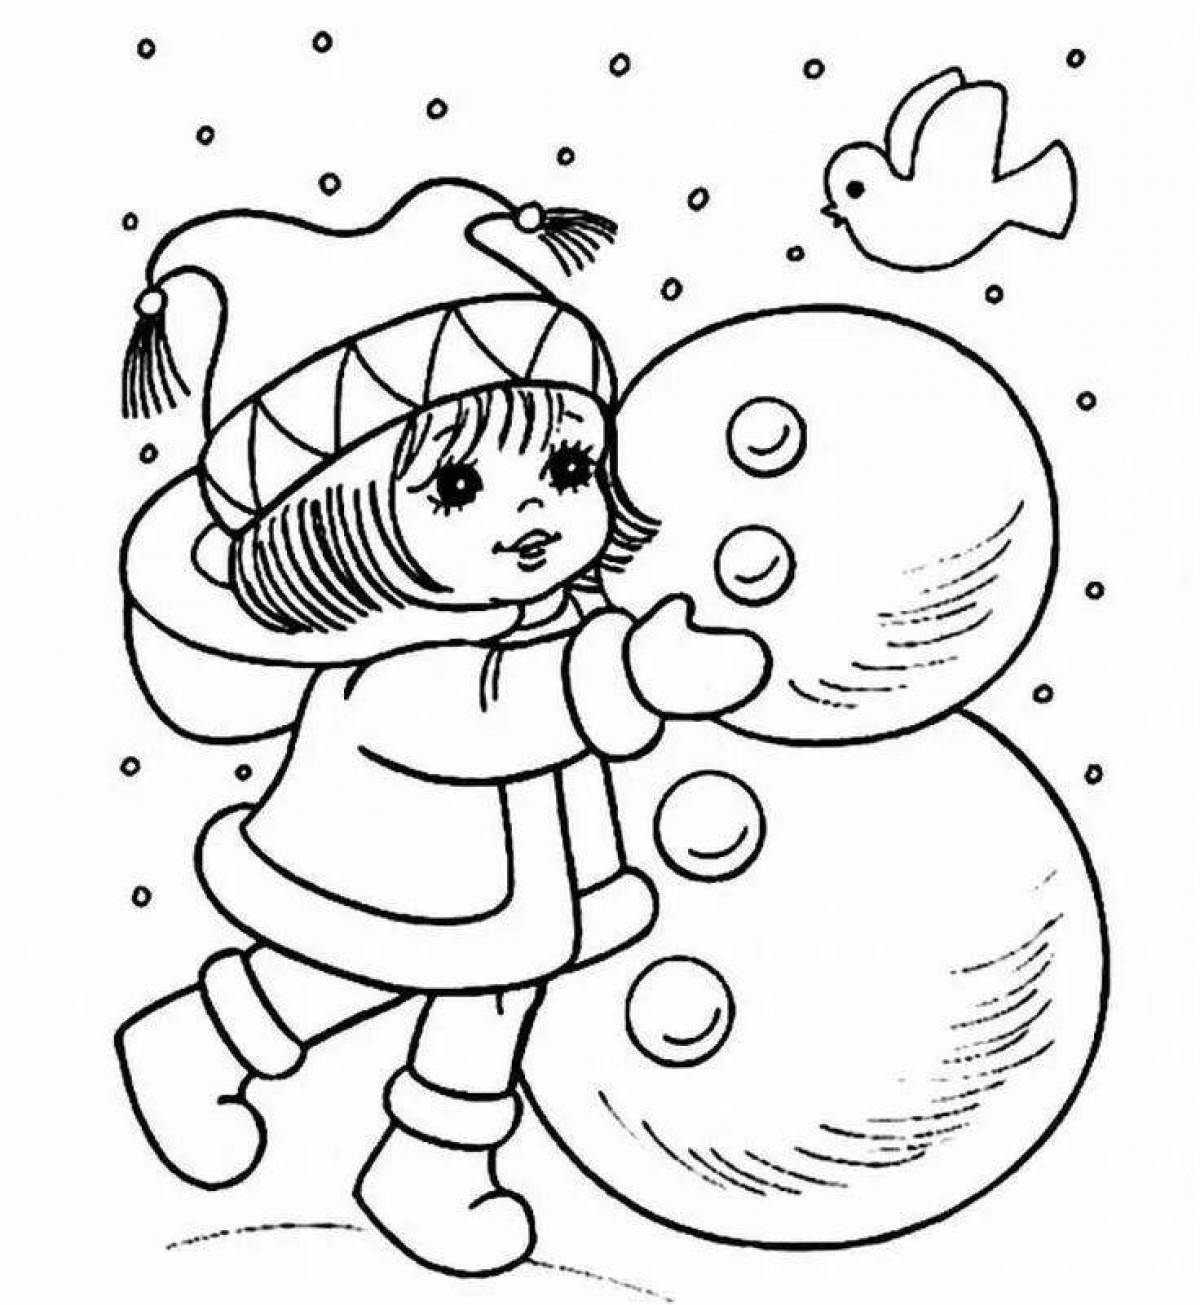 Glowing winter Christmas coloring book